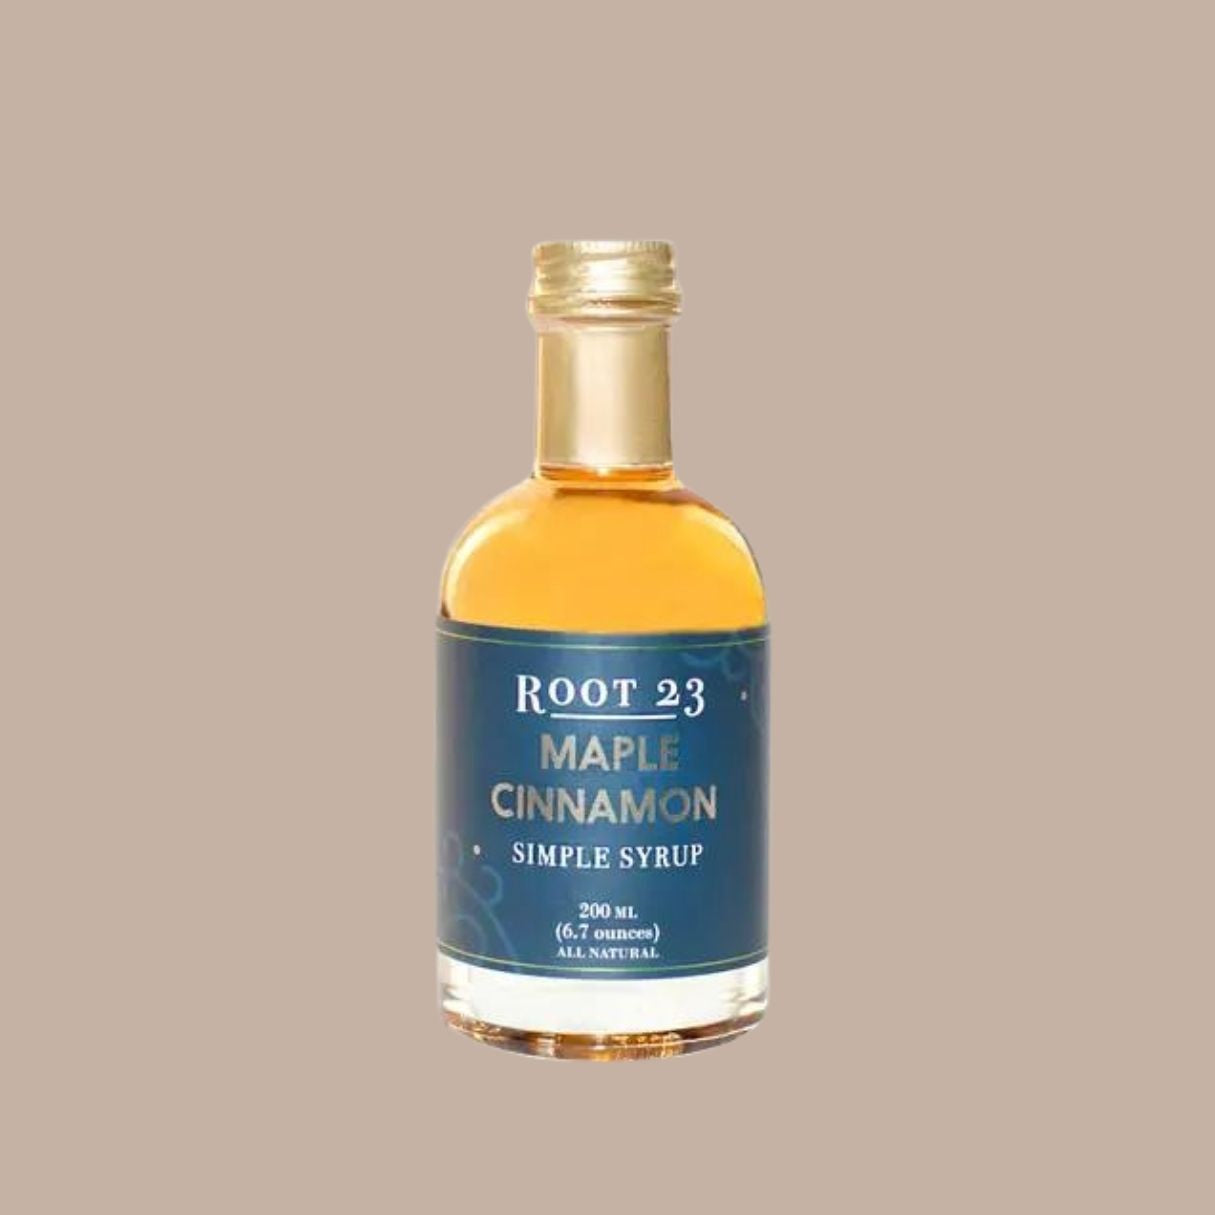 Maple Cinnamon Simple Syrup - Root 23 - Box Builder Item - KINSHIP GIFT - coffee/tea, Drinks/Cocktails, housewarming, LDT:GW:RESTRICT, Men, Root 23 - Pittsburgh - gift - boxes - gift - baskets - corporate - gifts - holiday - gifts